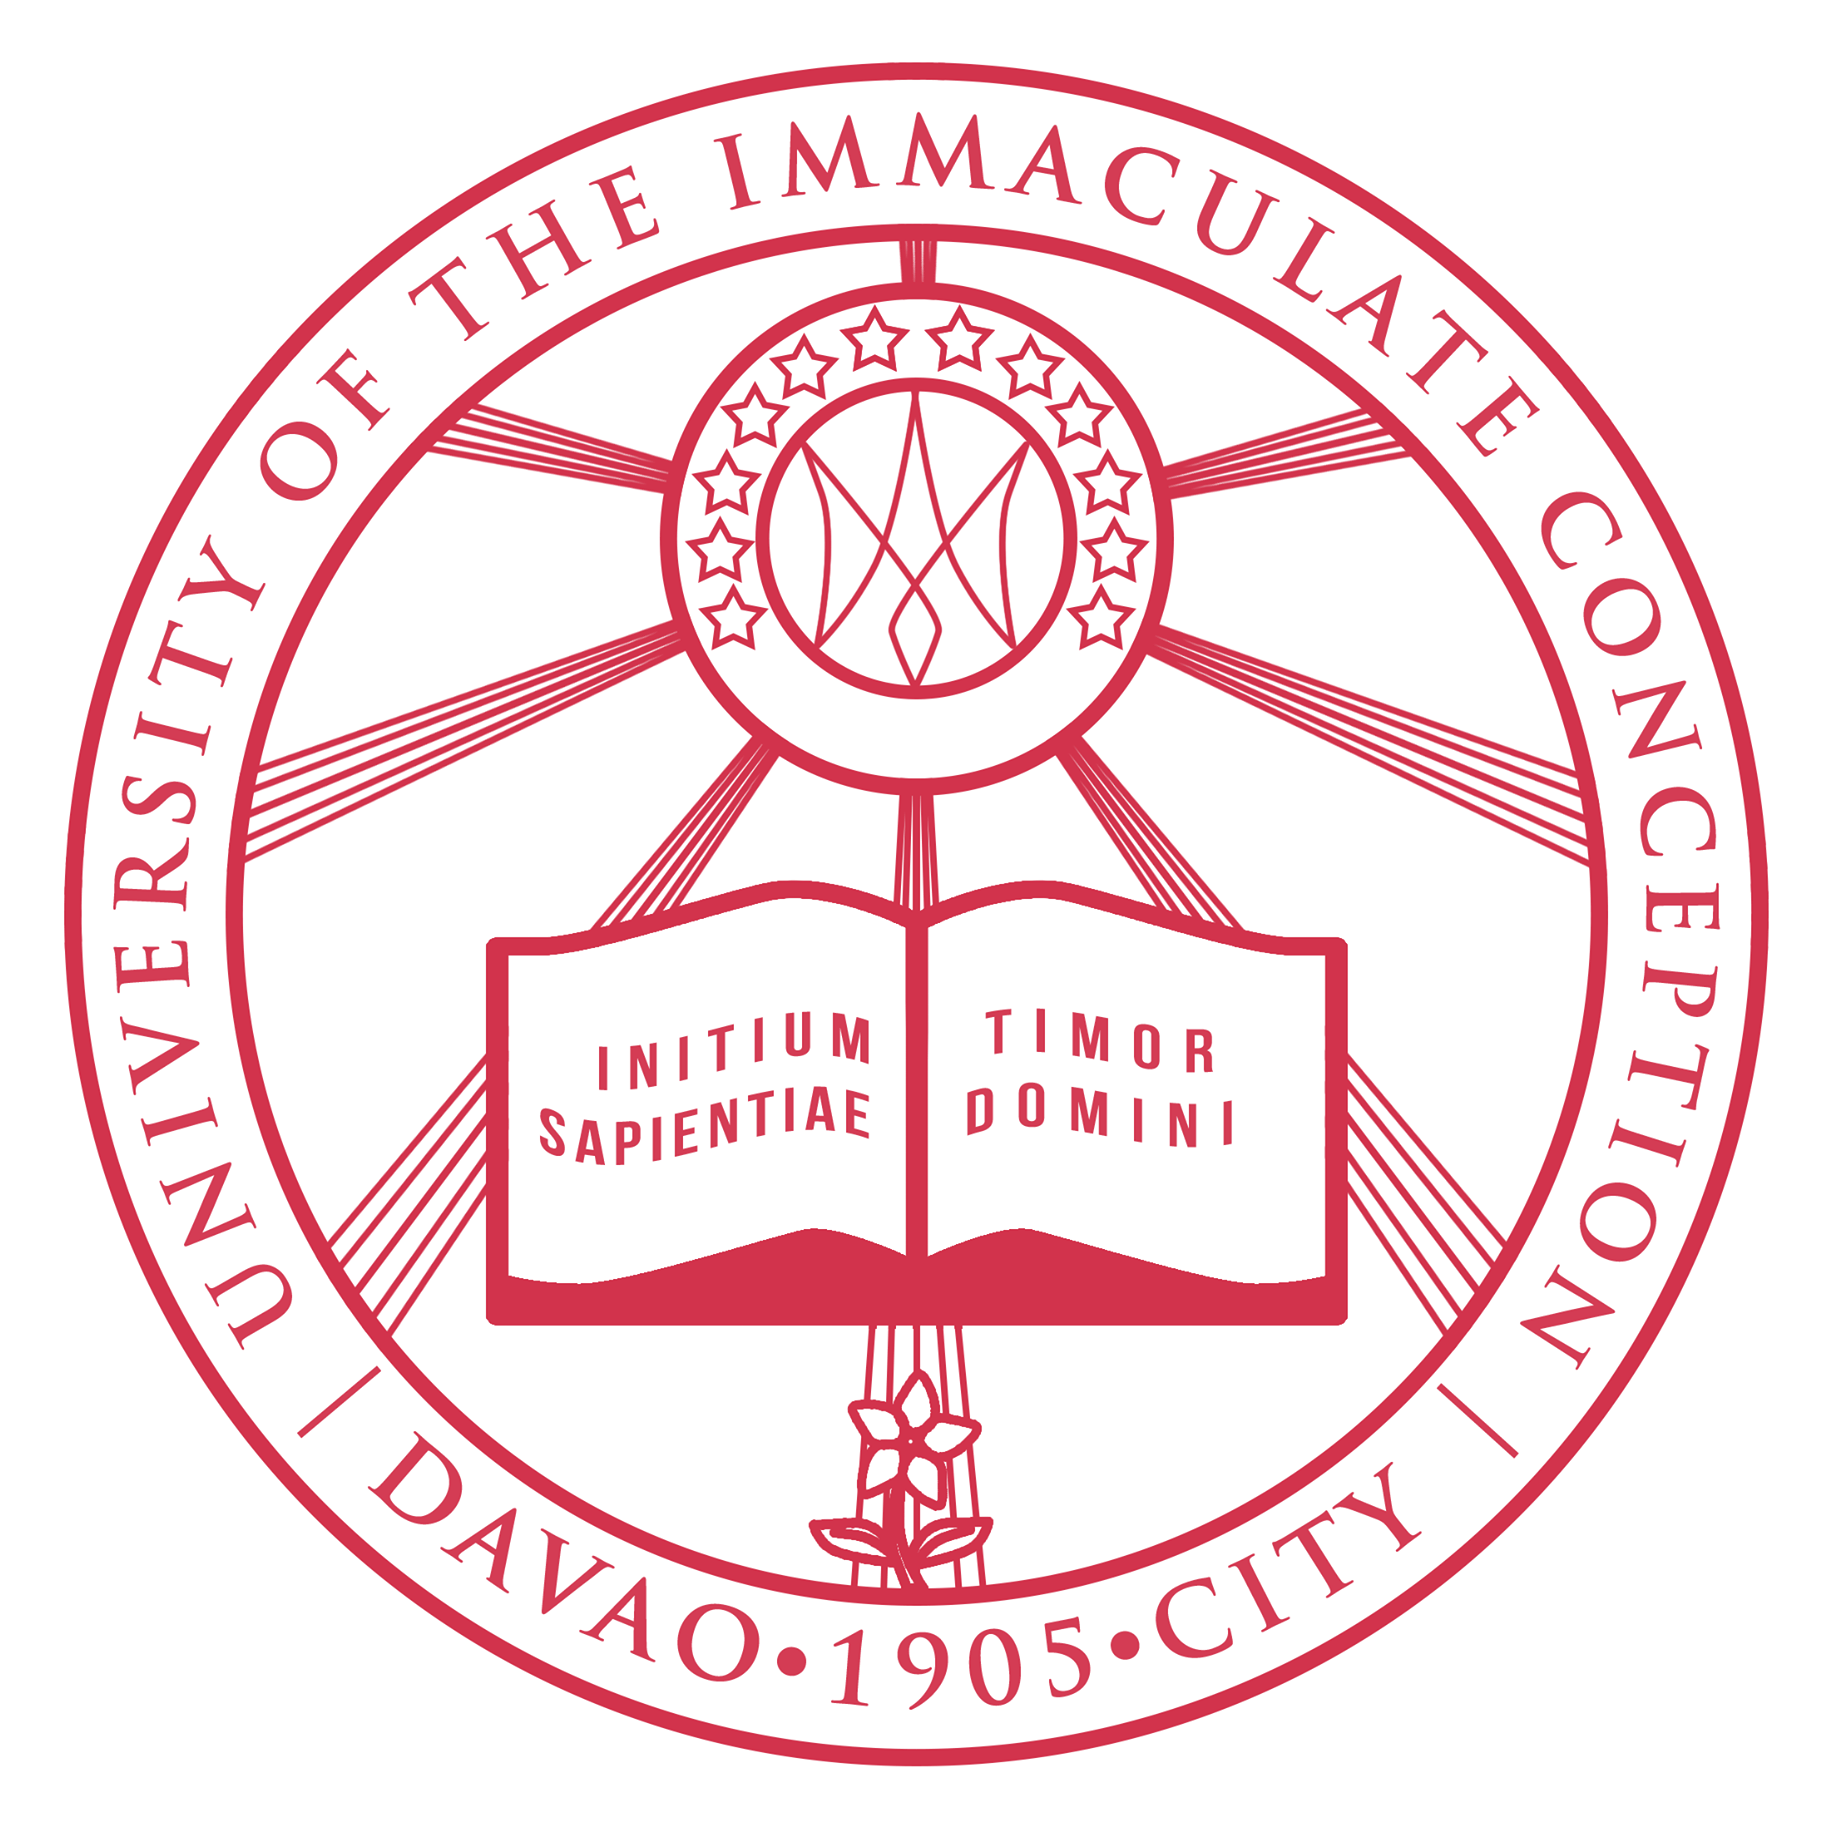 You are currently viewing University of the Immaculate Conception (UIC)